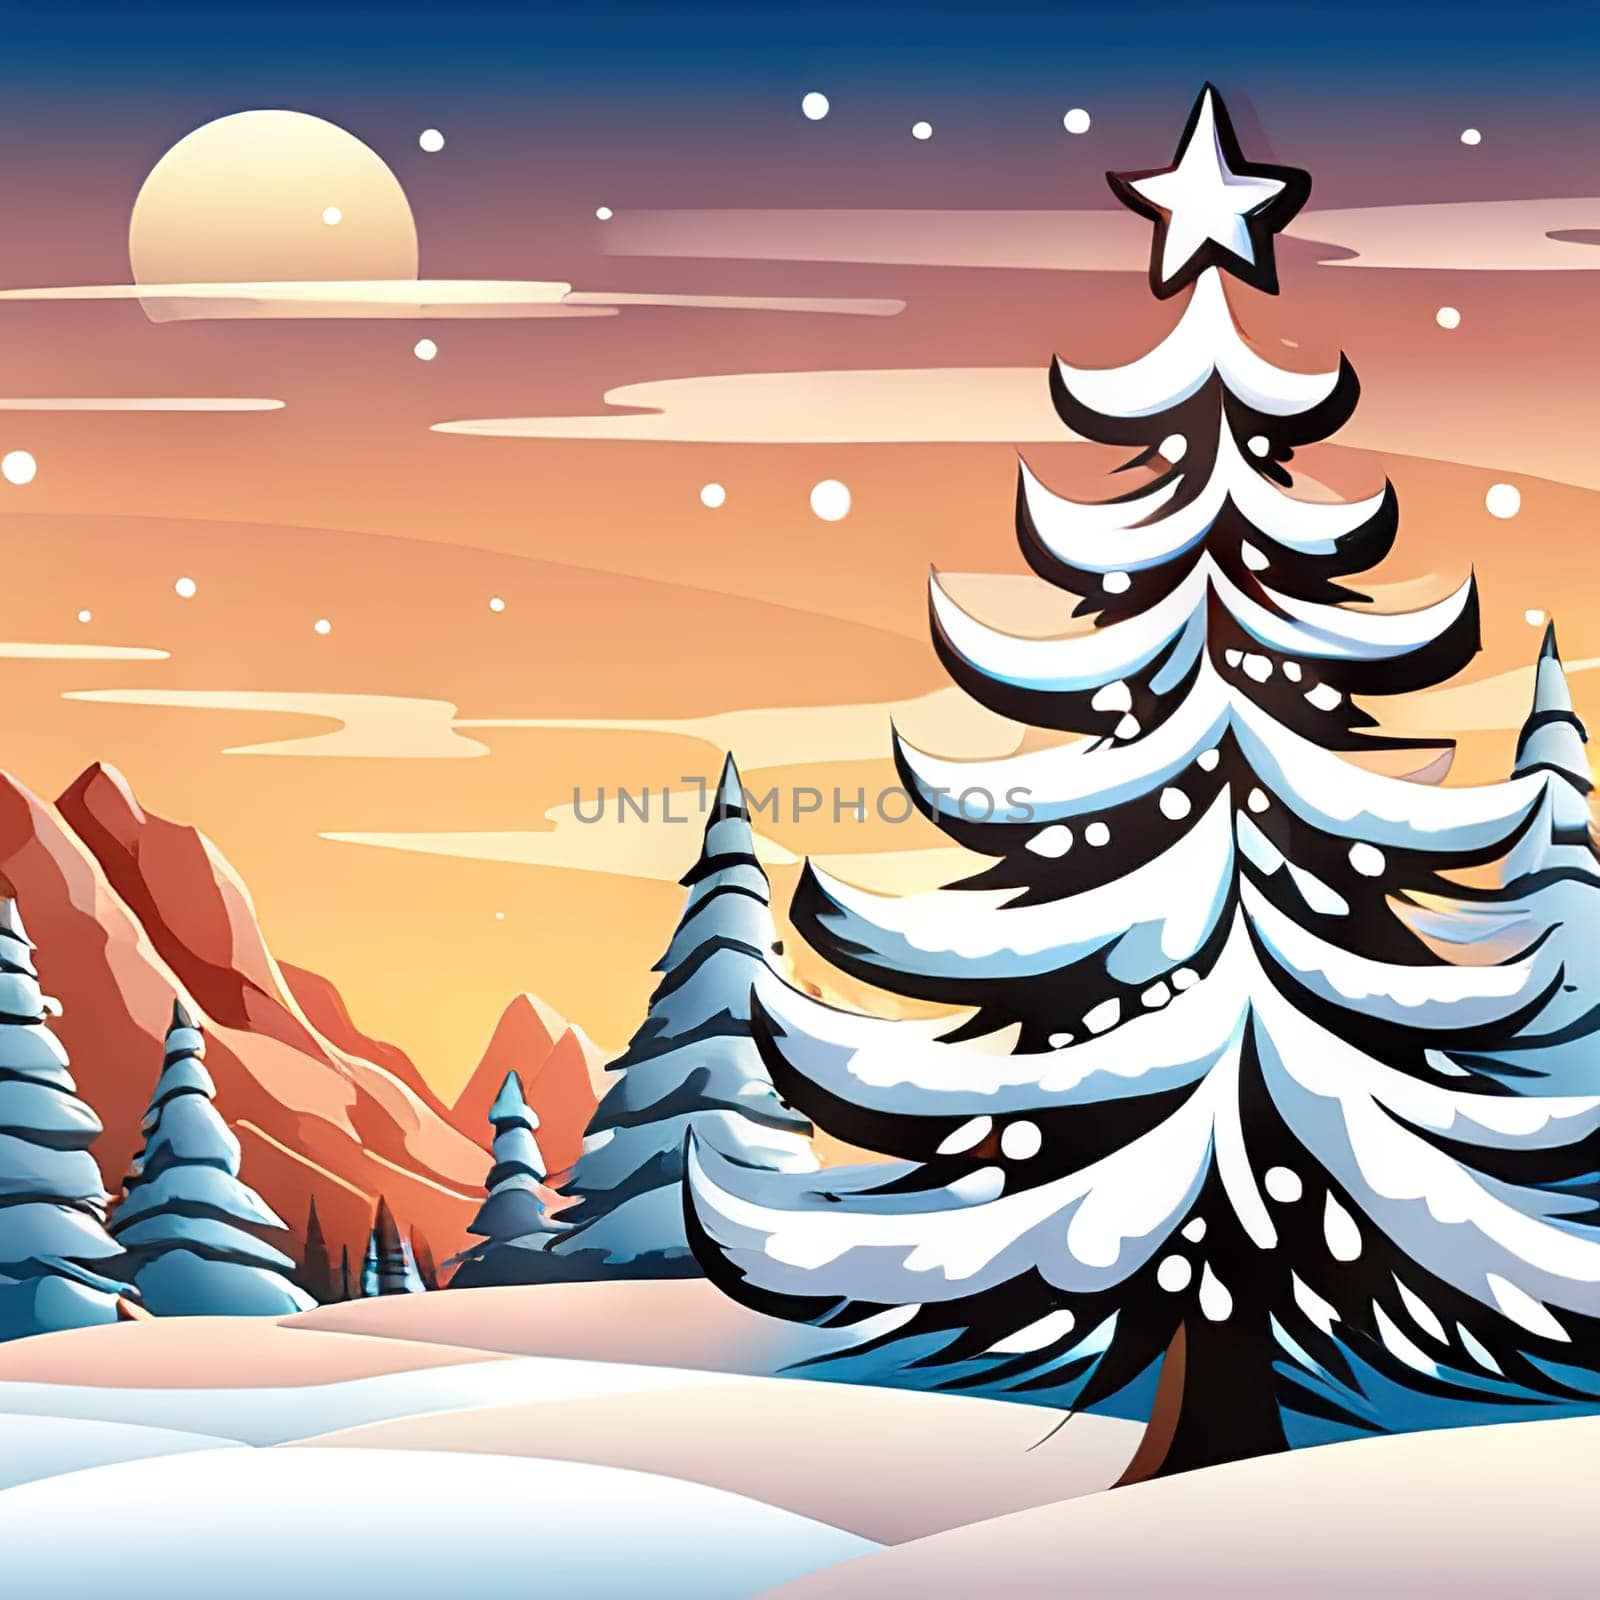 Merry Christmas and Happy New Year greeting card. Christmas landscape with copy space.